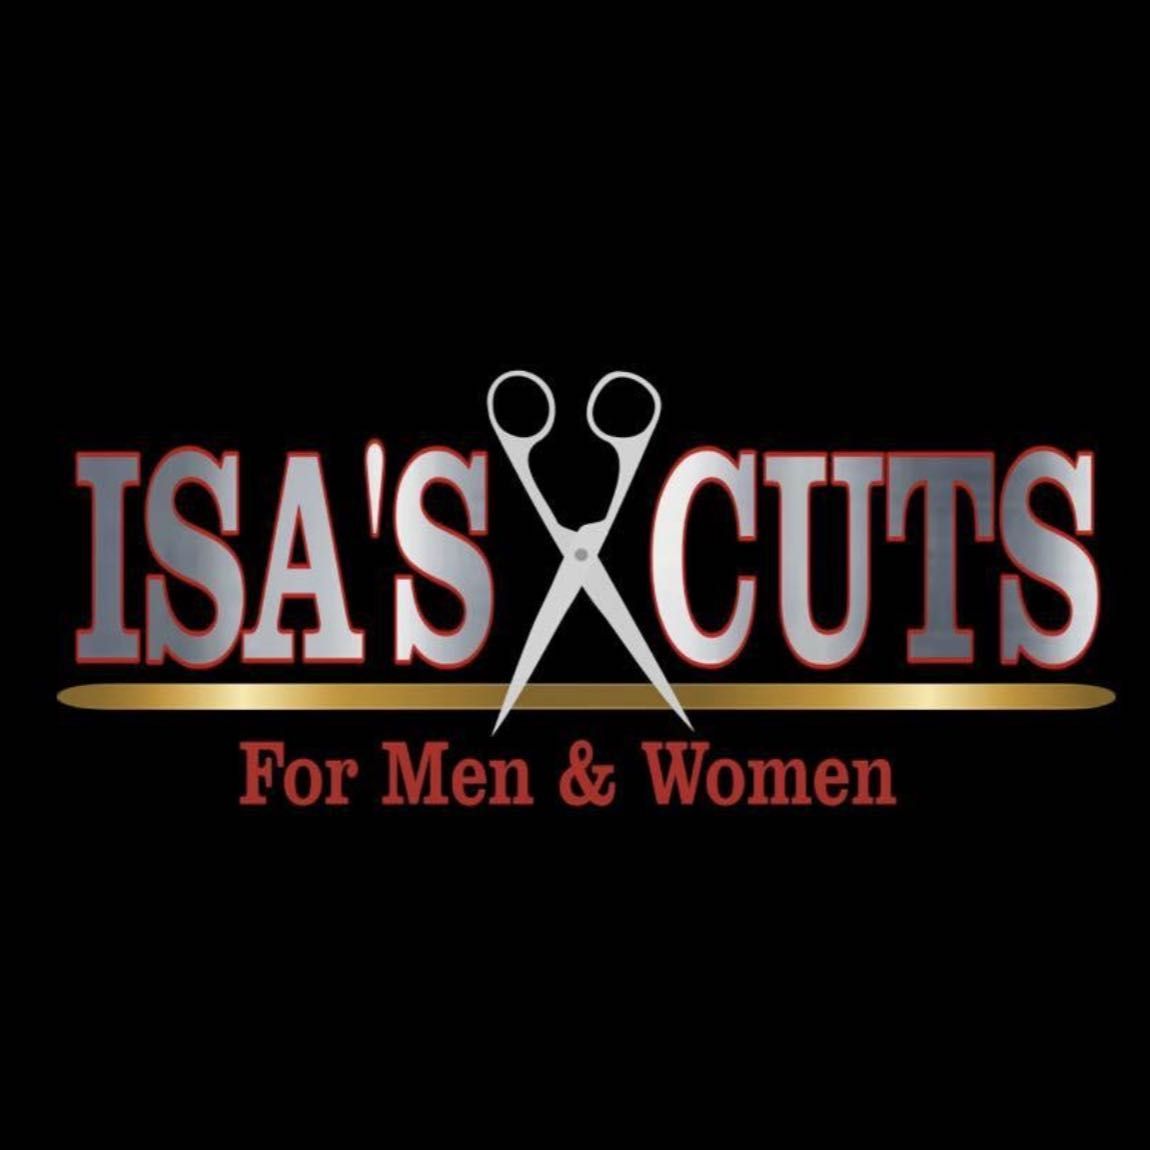 Isa’s Cuts, 3607 Central Ave, St Petersburg, 33713